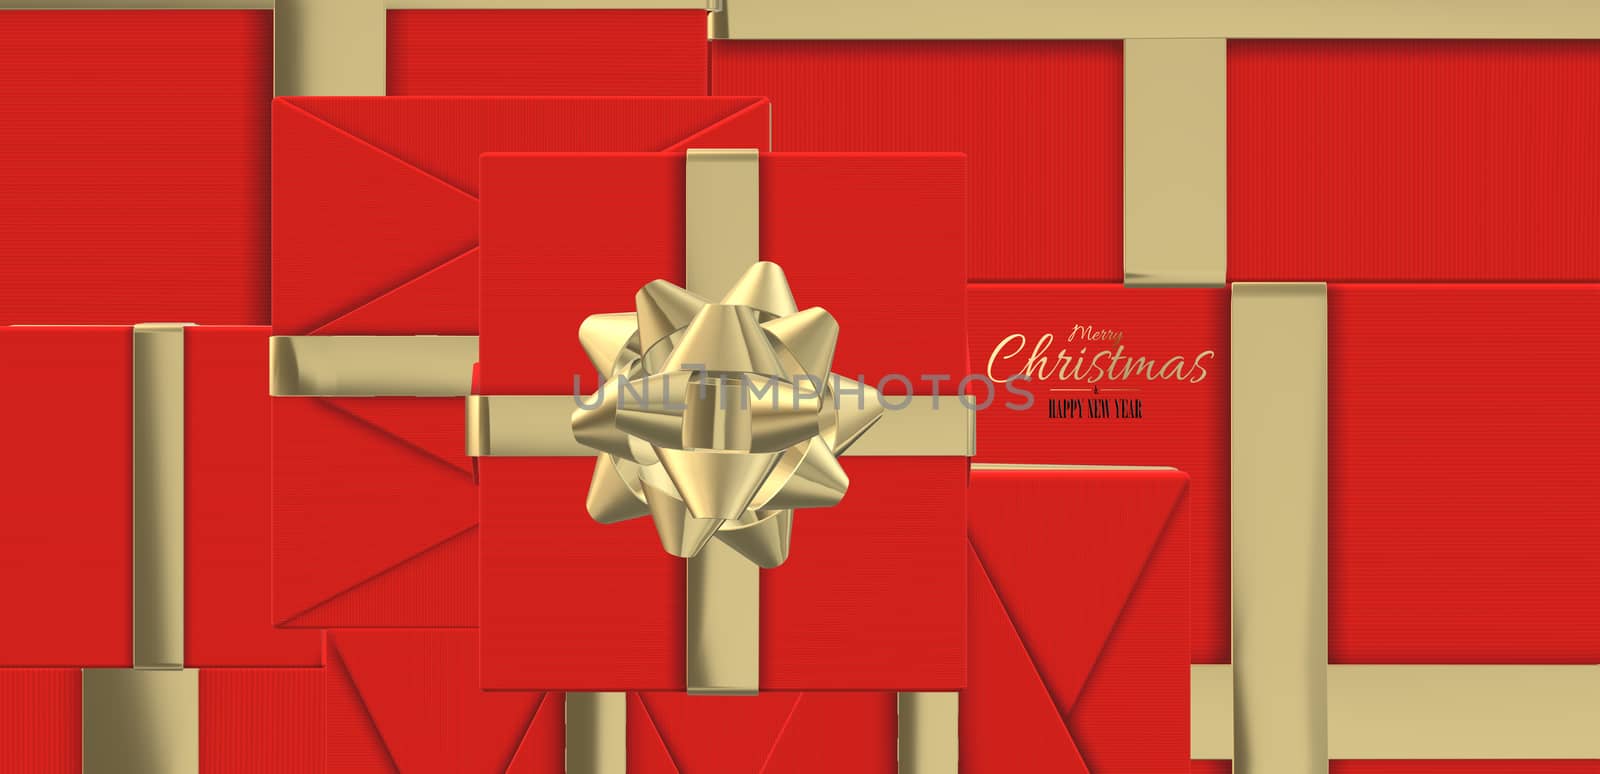 Christmas luxury design with 3D red Xmas gift boxes with golden bow. Golden text Merry Christmas Happy New Year. 3D illustration